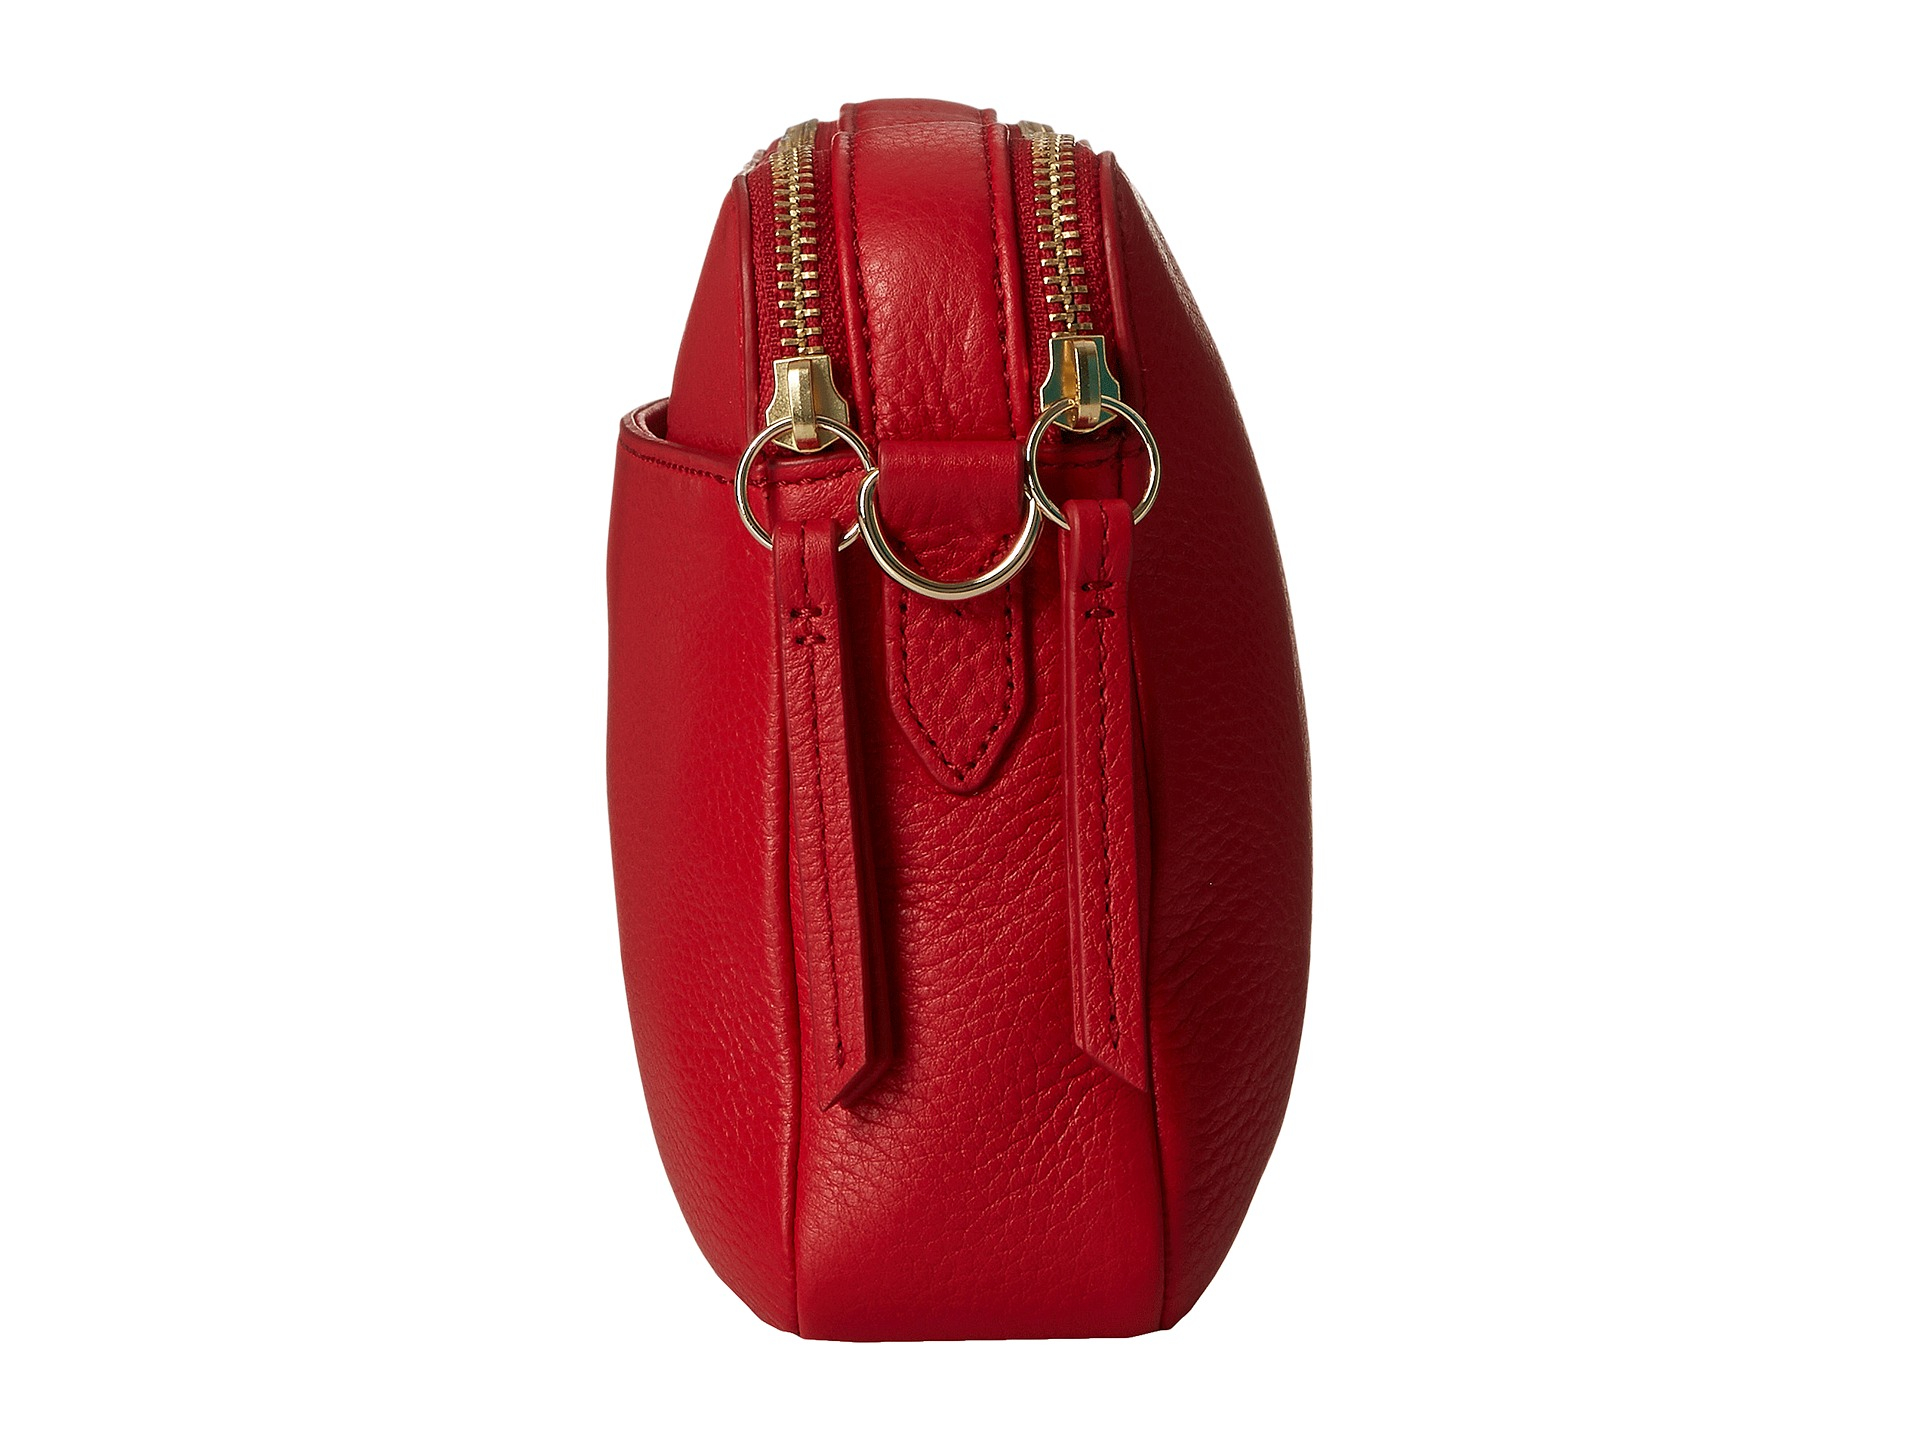 Fossil Sydney Leather Crossbody Bag in Claret Red (Red) - Lyst